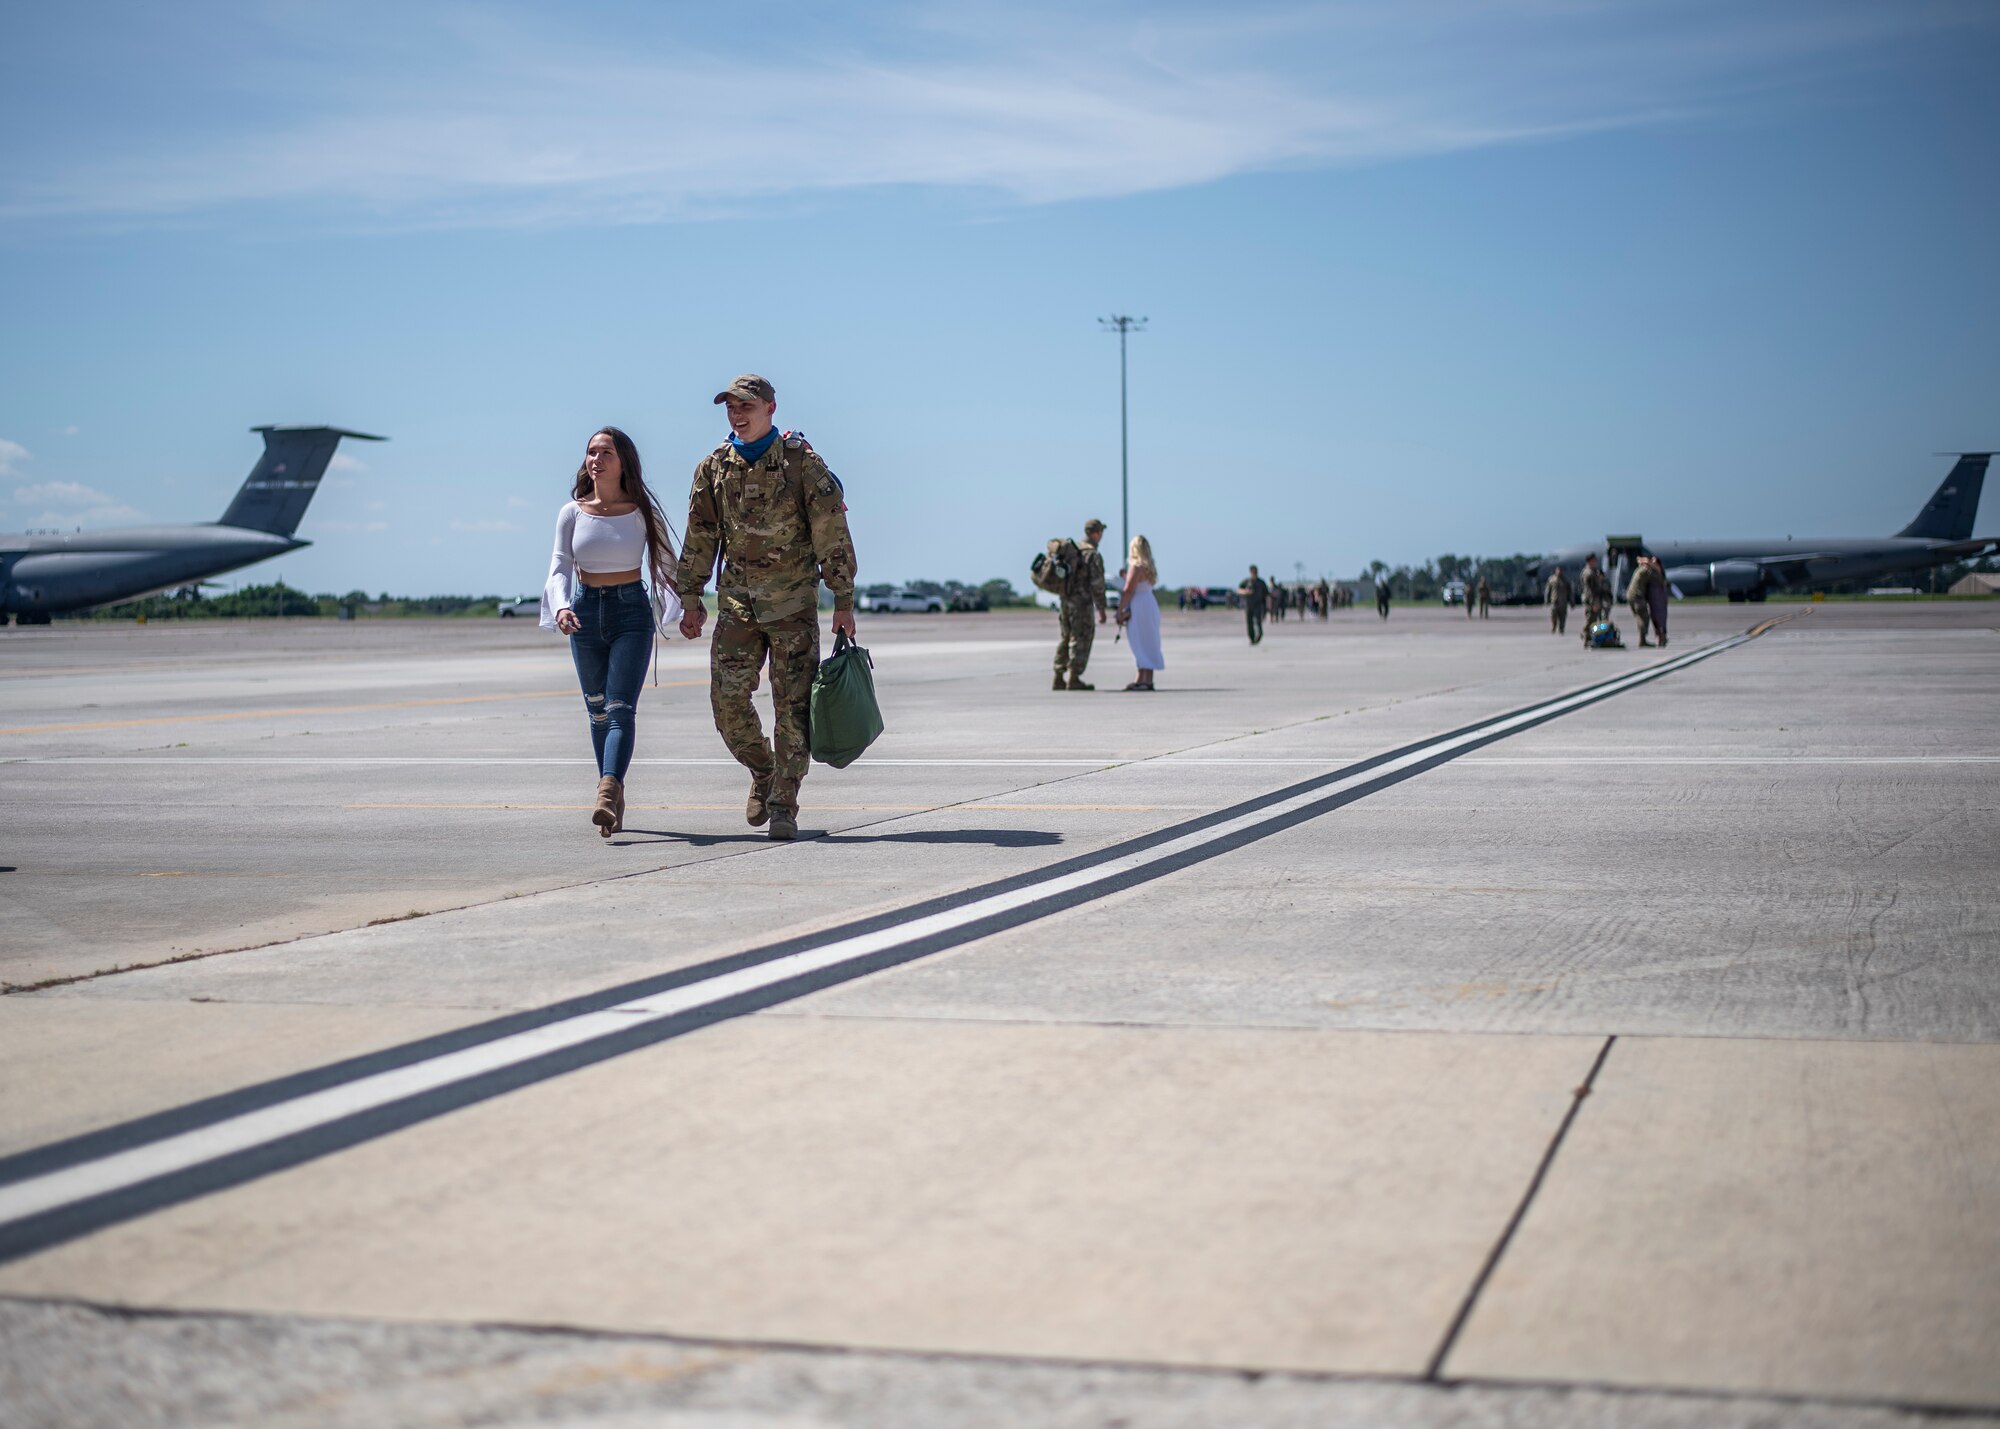 Airmen from the 6th Maintenance Group walk with their families after returning home from deployment at MacDill Air Force Base, Florida, Sept. 27, 2021.